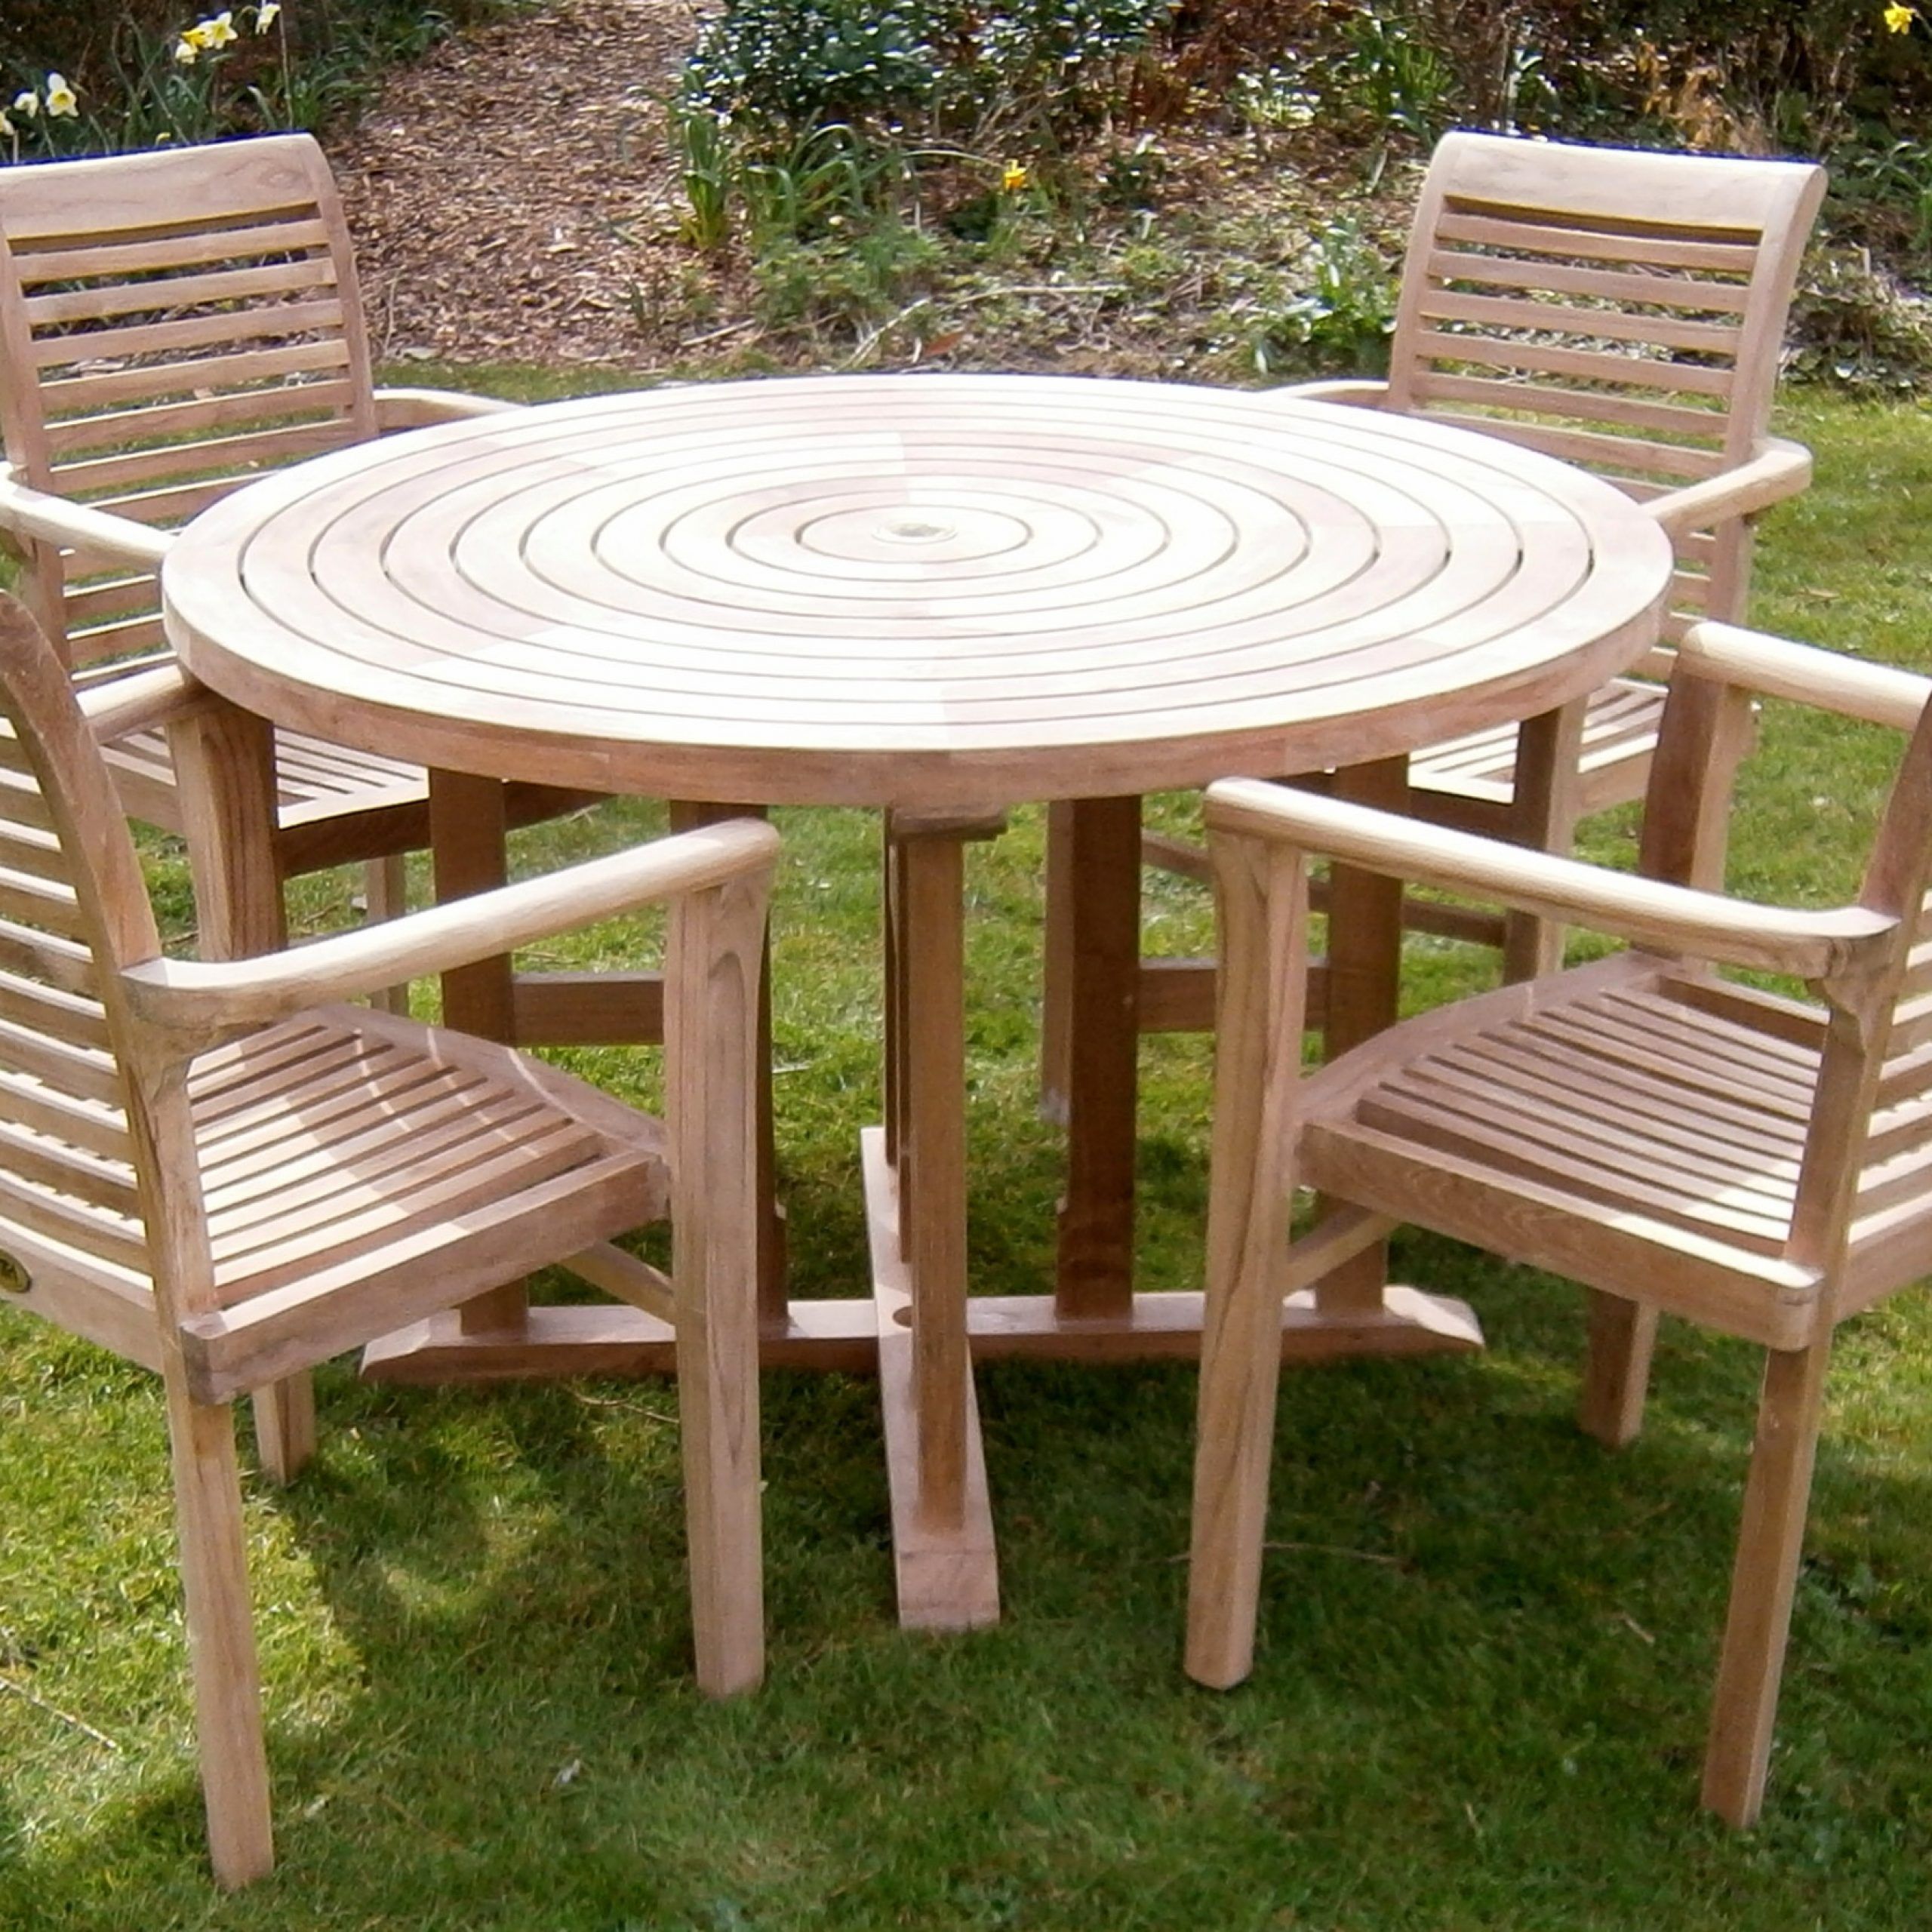 Turnworth Teak Ring Table And Chairs – Chairs And Tables Uk – Teak Pertaining To 2019 Teak Wood Outdoor Table And Chairs Sets (View 6 of 15)